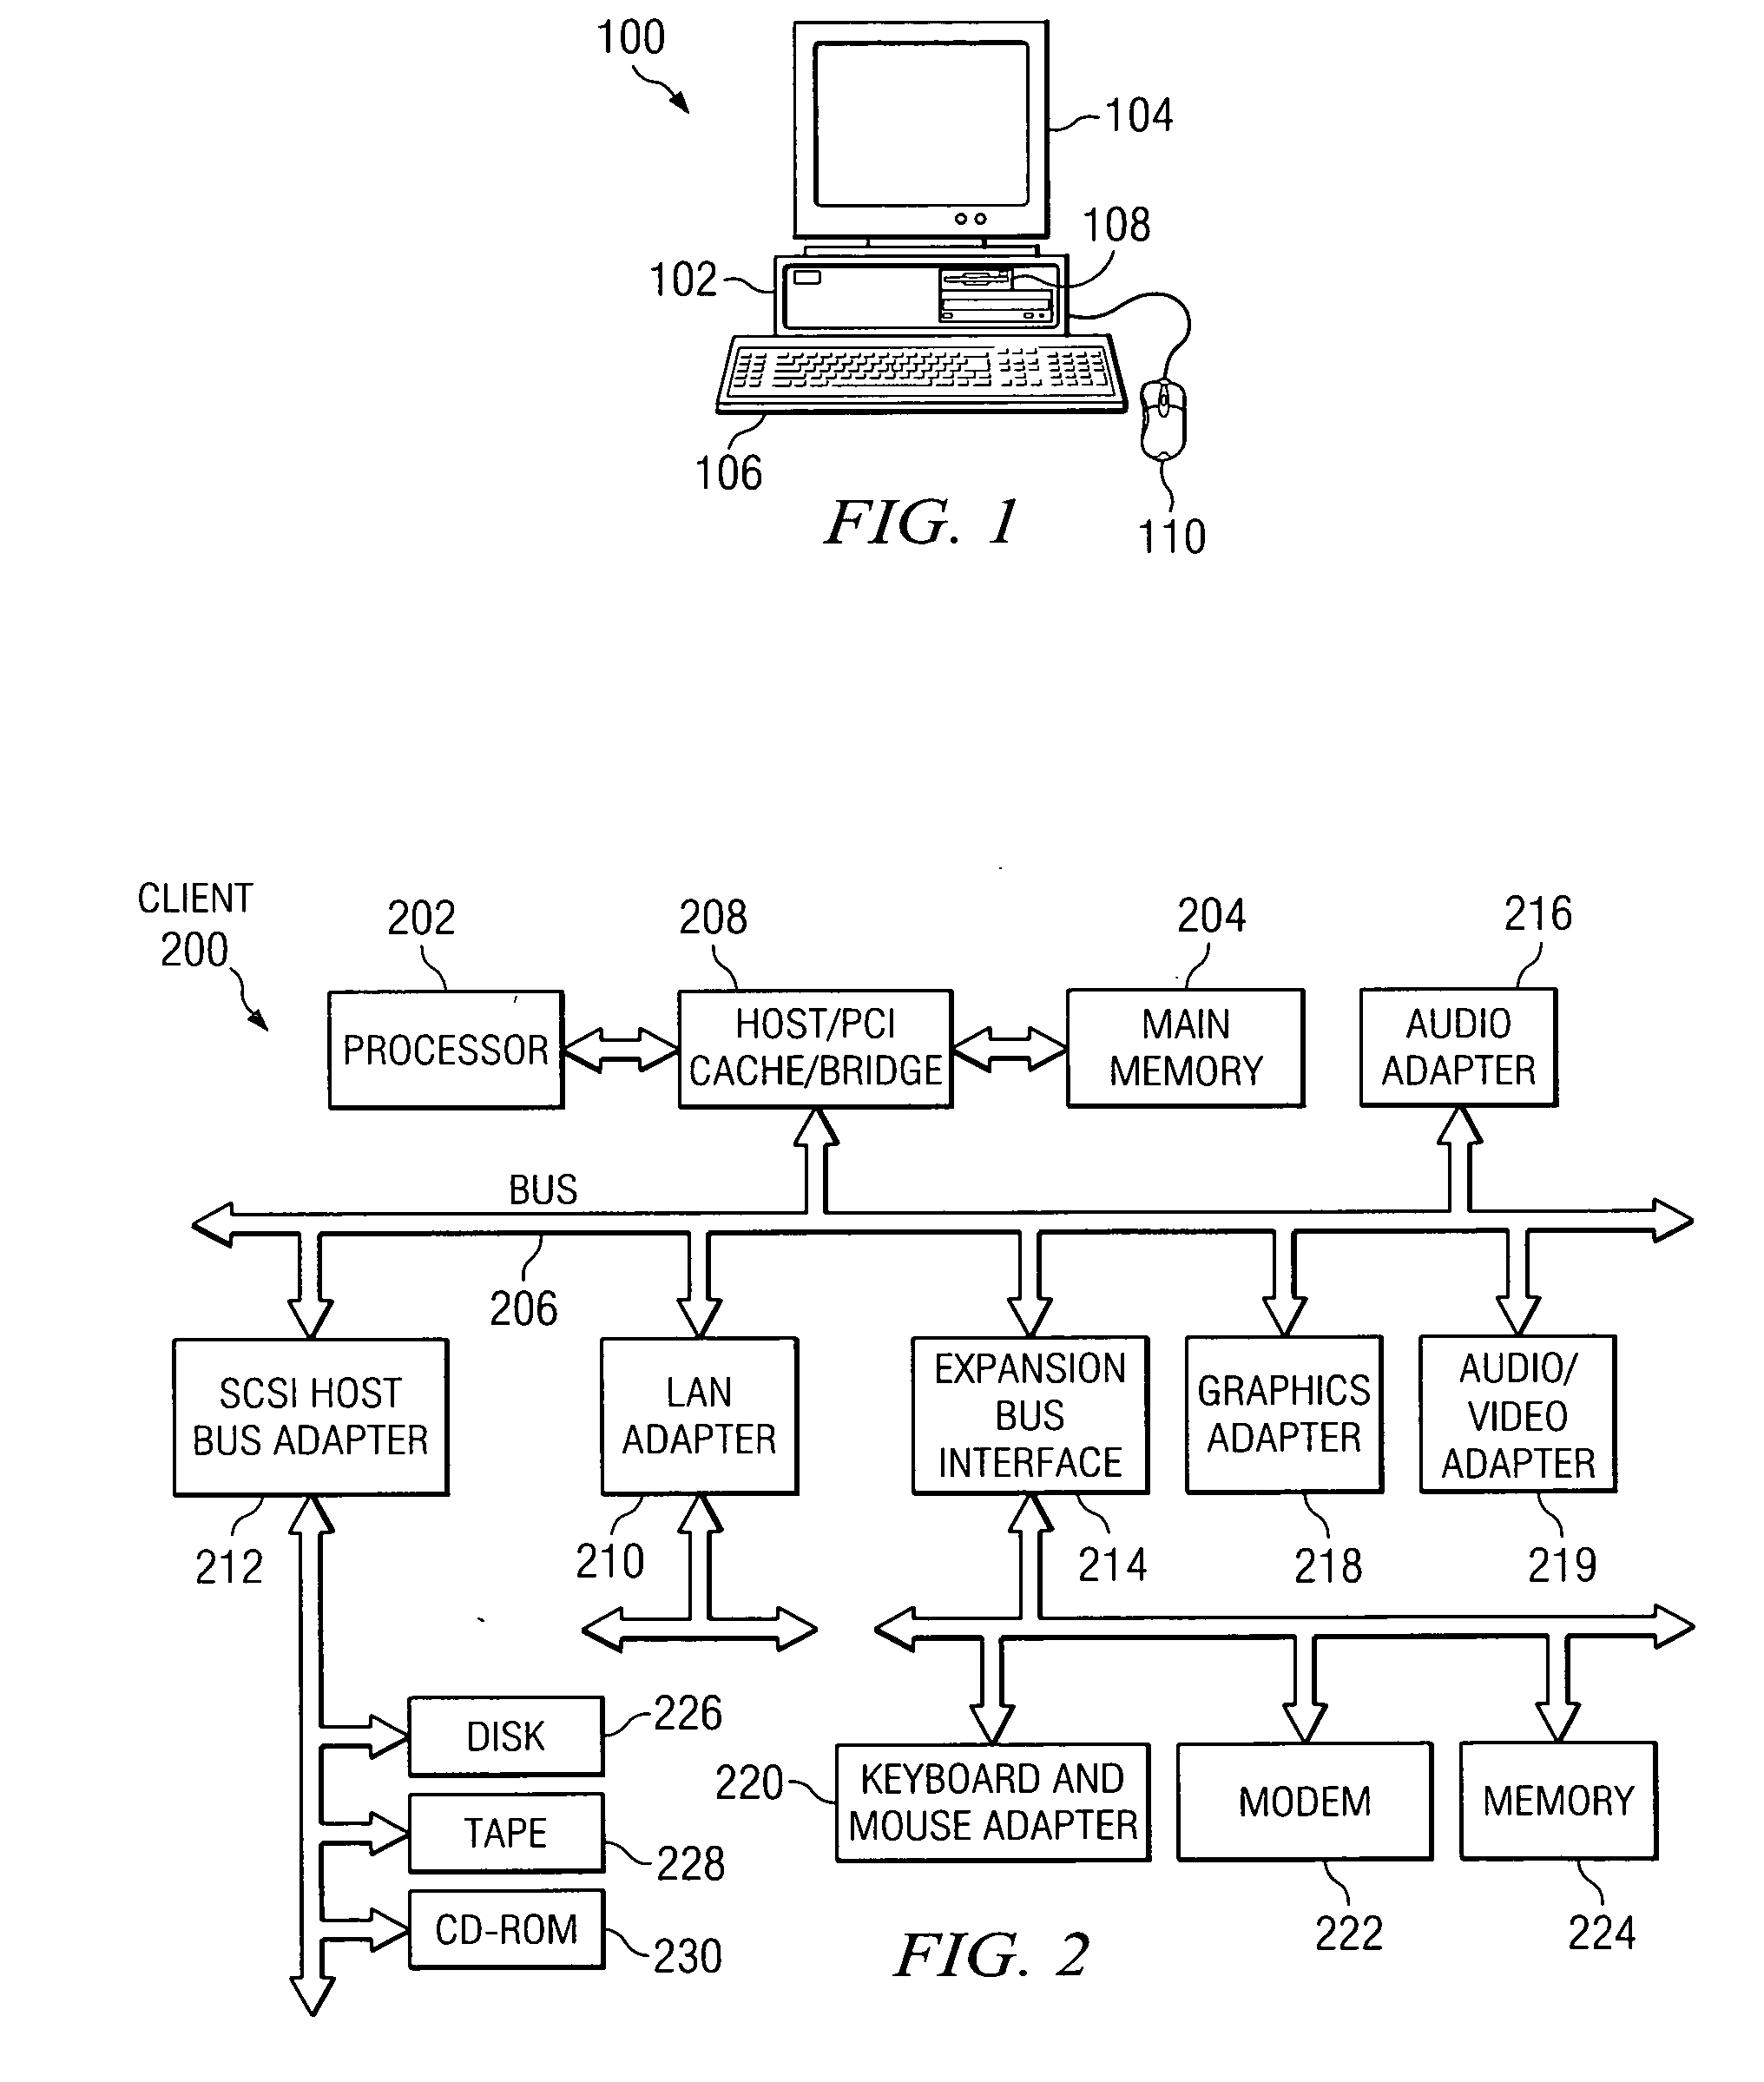 Method and apparatus for inlining native functions into compiled Java code